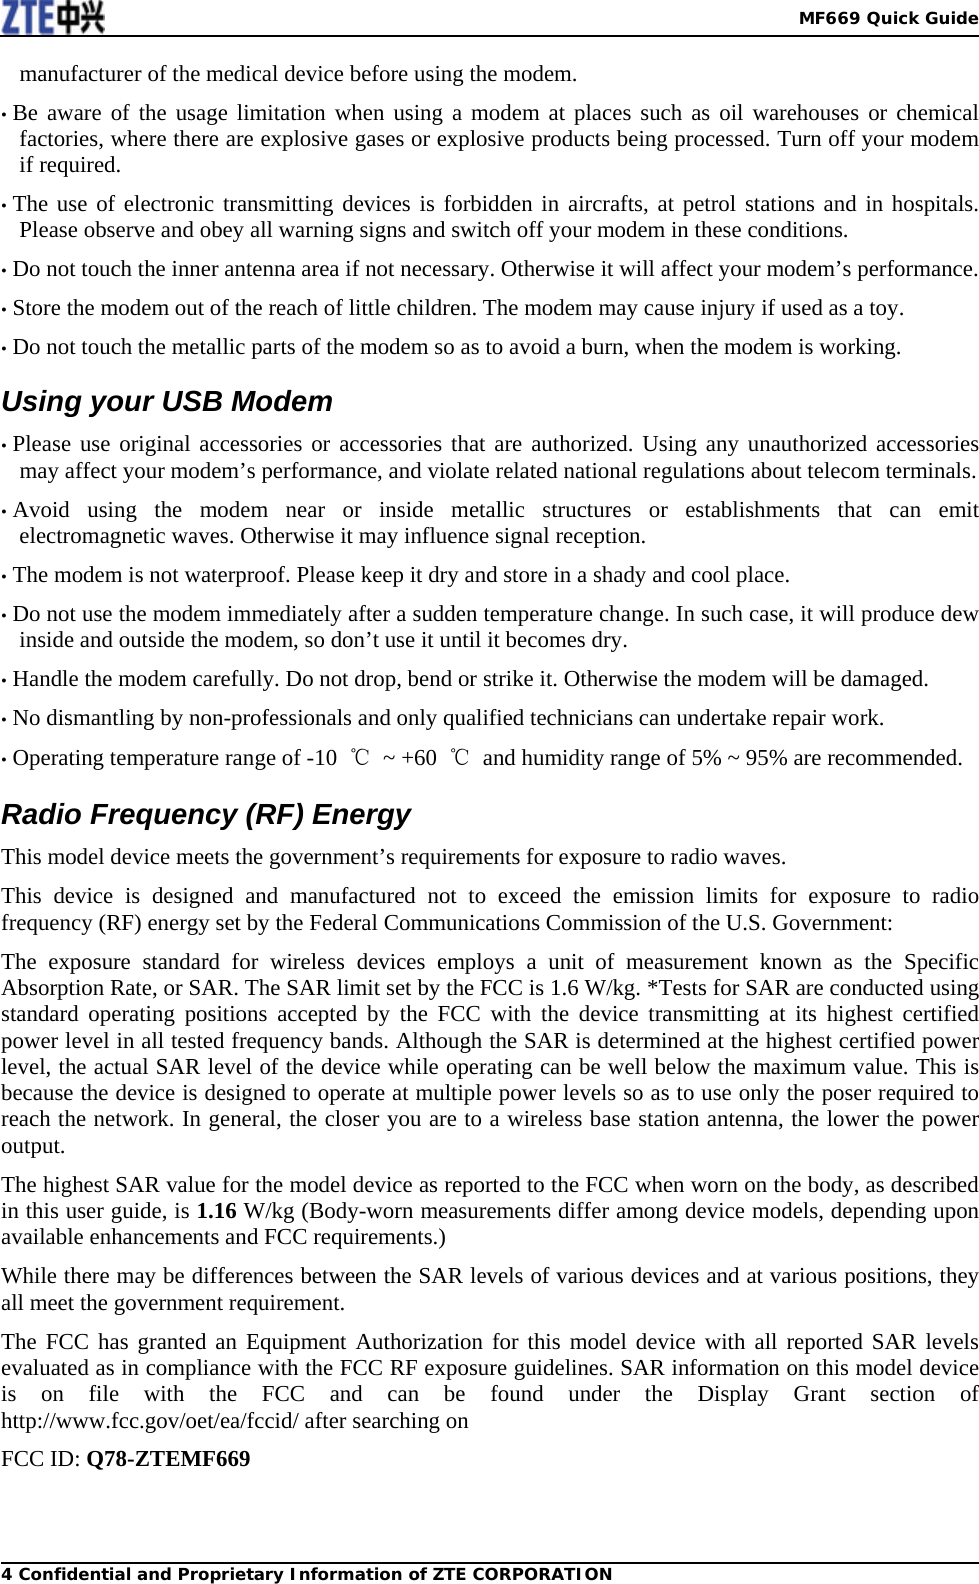   MF669 Quick Guide4 Confidential and Proprietary Information of ZTE CORPORATIONmanufacturer of the medical device before using the modem. • Be aware of the usage limitation when using a modem at places such as oil warehouses or chemical factories, where there are explosive gases or explosive products being processed. Turn off your modem if required. • The use of electronic transmitting devices is forbidden in aircrafts, at petrol stations and in hospitals. Please observe and obey all warning signs and switch off your modem in these conditions. • Do not touch the inner antenna area if not necessary. Otherwise it will affect your modem’s performance. • Store the modem out of the reach of little children. The modem may cause injury if used as a toy. • Do not touch the metallic parts of the modem so as to avoid a burn, when the modem is working. Using your USB Modem • Please use original accessories or accessories that are authorized. Using any unauthorized accessories may affect your modem’s performance, and violate related national regulations about telecom terminals. • Avoid using the modem near or inside metallic structures or establishments that can emit electromagnetic waves. Otherwise it may influence signal reception. • The modem is not waterproof. Please keep it dry and store in a shady and cool place. • Do not use the modem immediately after a sudden temperature change. In such case, it will produce dew inside and outside the modem, so don’t use it until it becomes dry. • Handle the modem carefully. Do not drop, bend or strike it. Otherwise the modem will be damaged. • No dismantling by non-professionals and only qualified technicians can undertake repair work. • Operating temperature range of -10  ℃ ~ +60 ℃  and humidity range of 5% ~ 95% are recommended. Radio Frequency (RF) Energy This model device meets the government’s requirements for exposure to radio waves. This device is designed and manufactured not to exceed the emission limits for exposure to radio frequency (RF) energy set by the Federal Communications Commission of the U.S. Government: The exposure standard for wireless devices employs a unit of measurement known as the Specific Absorption Rate, or SAR. The SAR limit set by the FCC is 1.6 W/kg. *Tests for SAR are conducted using standard operating positions accepted by the FCC with the device transmitting at its highest certified power level in all tested frequency bands. Although the SAR is determined at the highest certified power level, the actual SAR level of the device while operating can be well below the maximum value. This is because the device is designed to operate at multiple power levels so as to use only the poser required to reach the network. In general, the closer you are to a wireless base station antenna, the lower the power output. The highest SAR value for the model device as reported to the FCC when worn on the body, as described in this user guide, is 1.16 W/kg (Body-worn measurements differ among device models, depending upon available enhancements and FCC requirements.) While there may be differences between the SAR levels of various devices and at various positions, they all meet the government requirement. The FCC has granted an Equipment Authorization for this model device with all reported SAR levels evaluated as in compliance with the FCC RF exposure guidelines. SAR information on this model device is on file with the FCC and can be found under the Display Grant section of http://www.fcc.gov/oet/ea/fccid/ after searching on FCC ID: Q78-ZTEMF669 